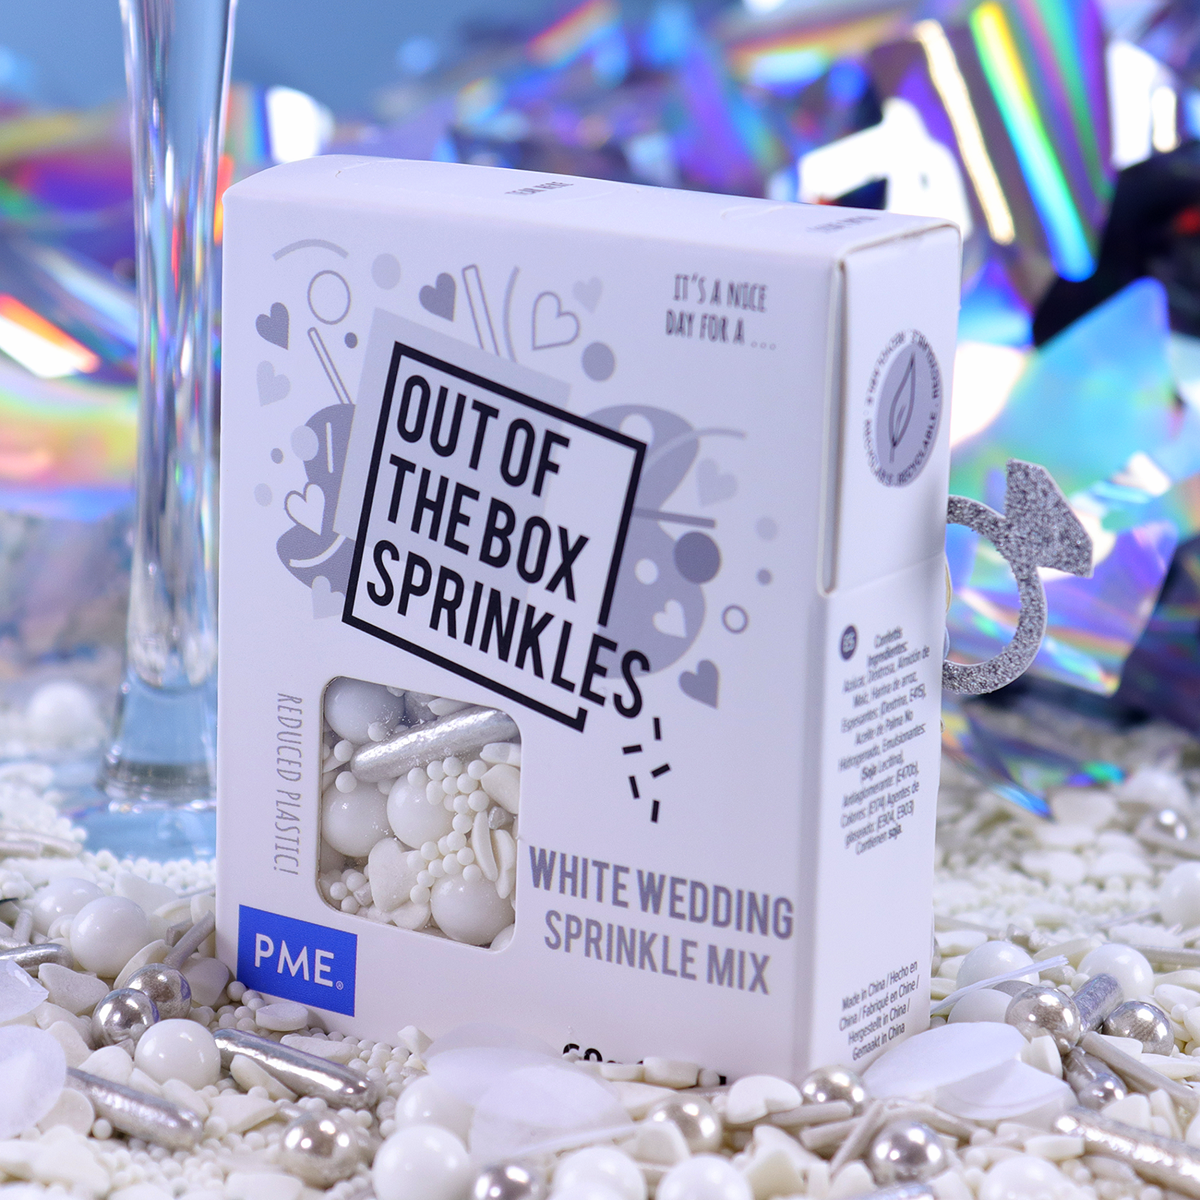 PME Wedding White Sprinkle Mix (Out of the Box) 60g